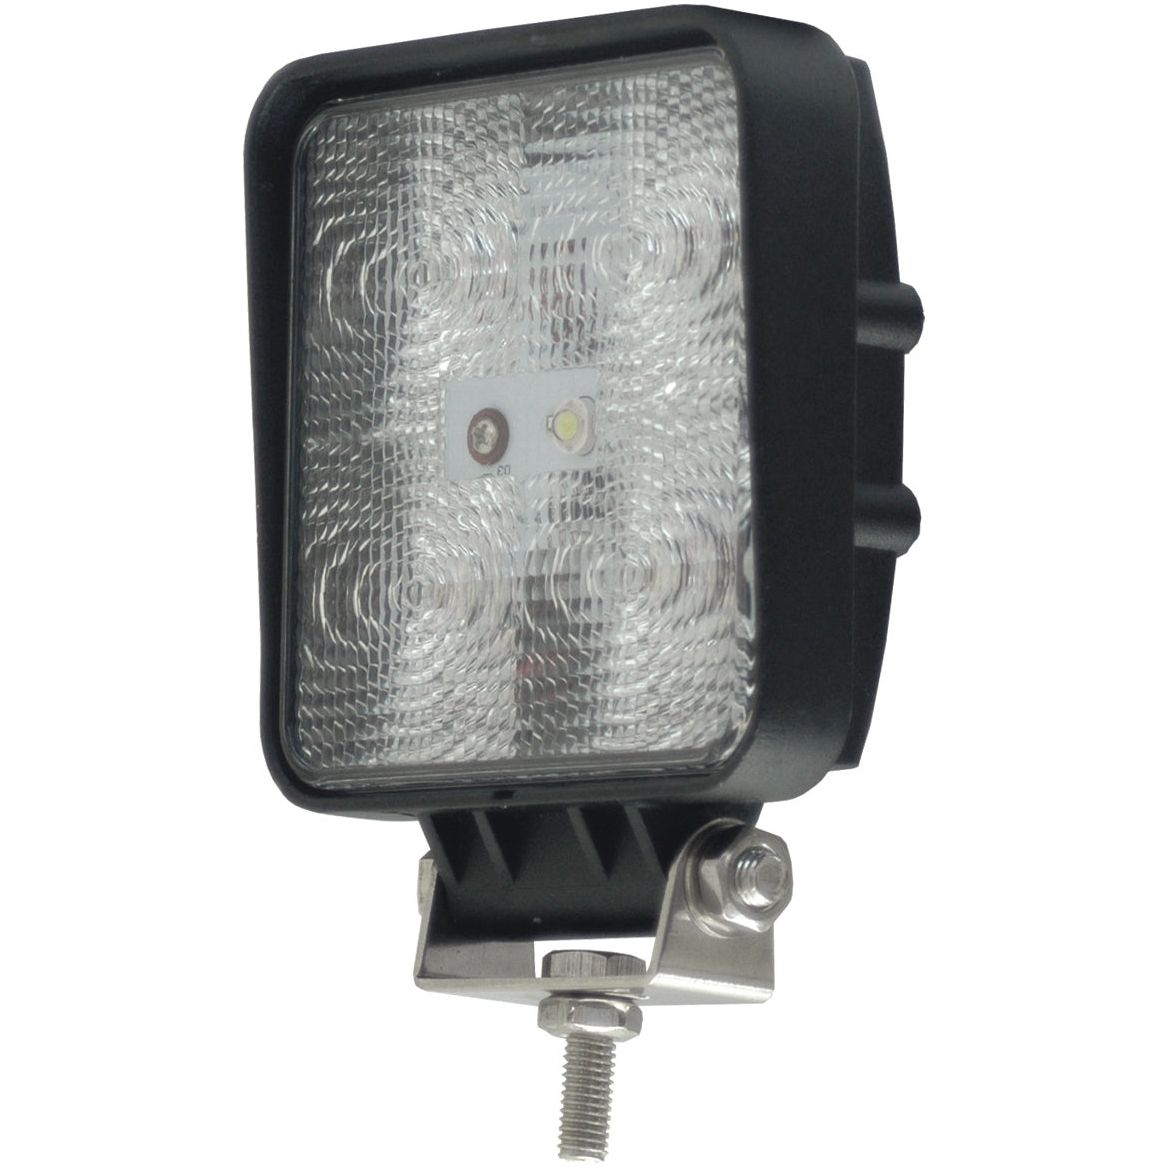 LED Work Light, Interference: Not Classified, 1800 Lumens Raw, 10-30V (Display pack 10 pcs.)
 - S.29846 - Farming Parts